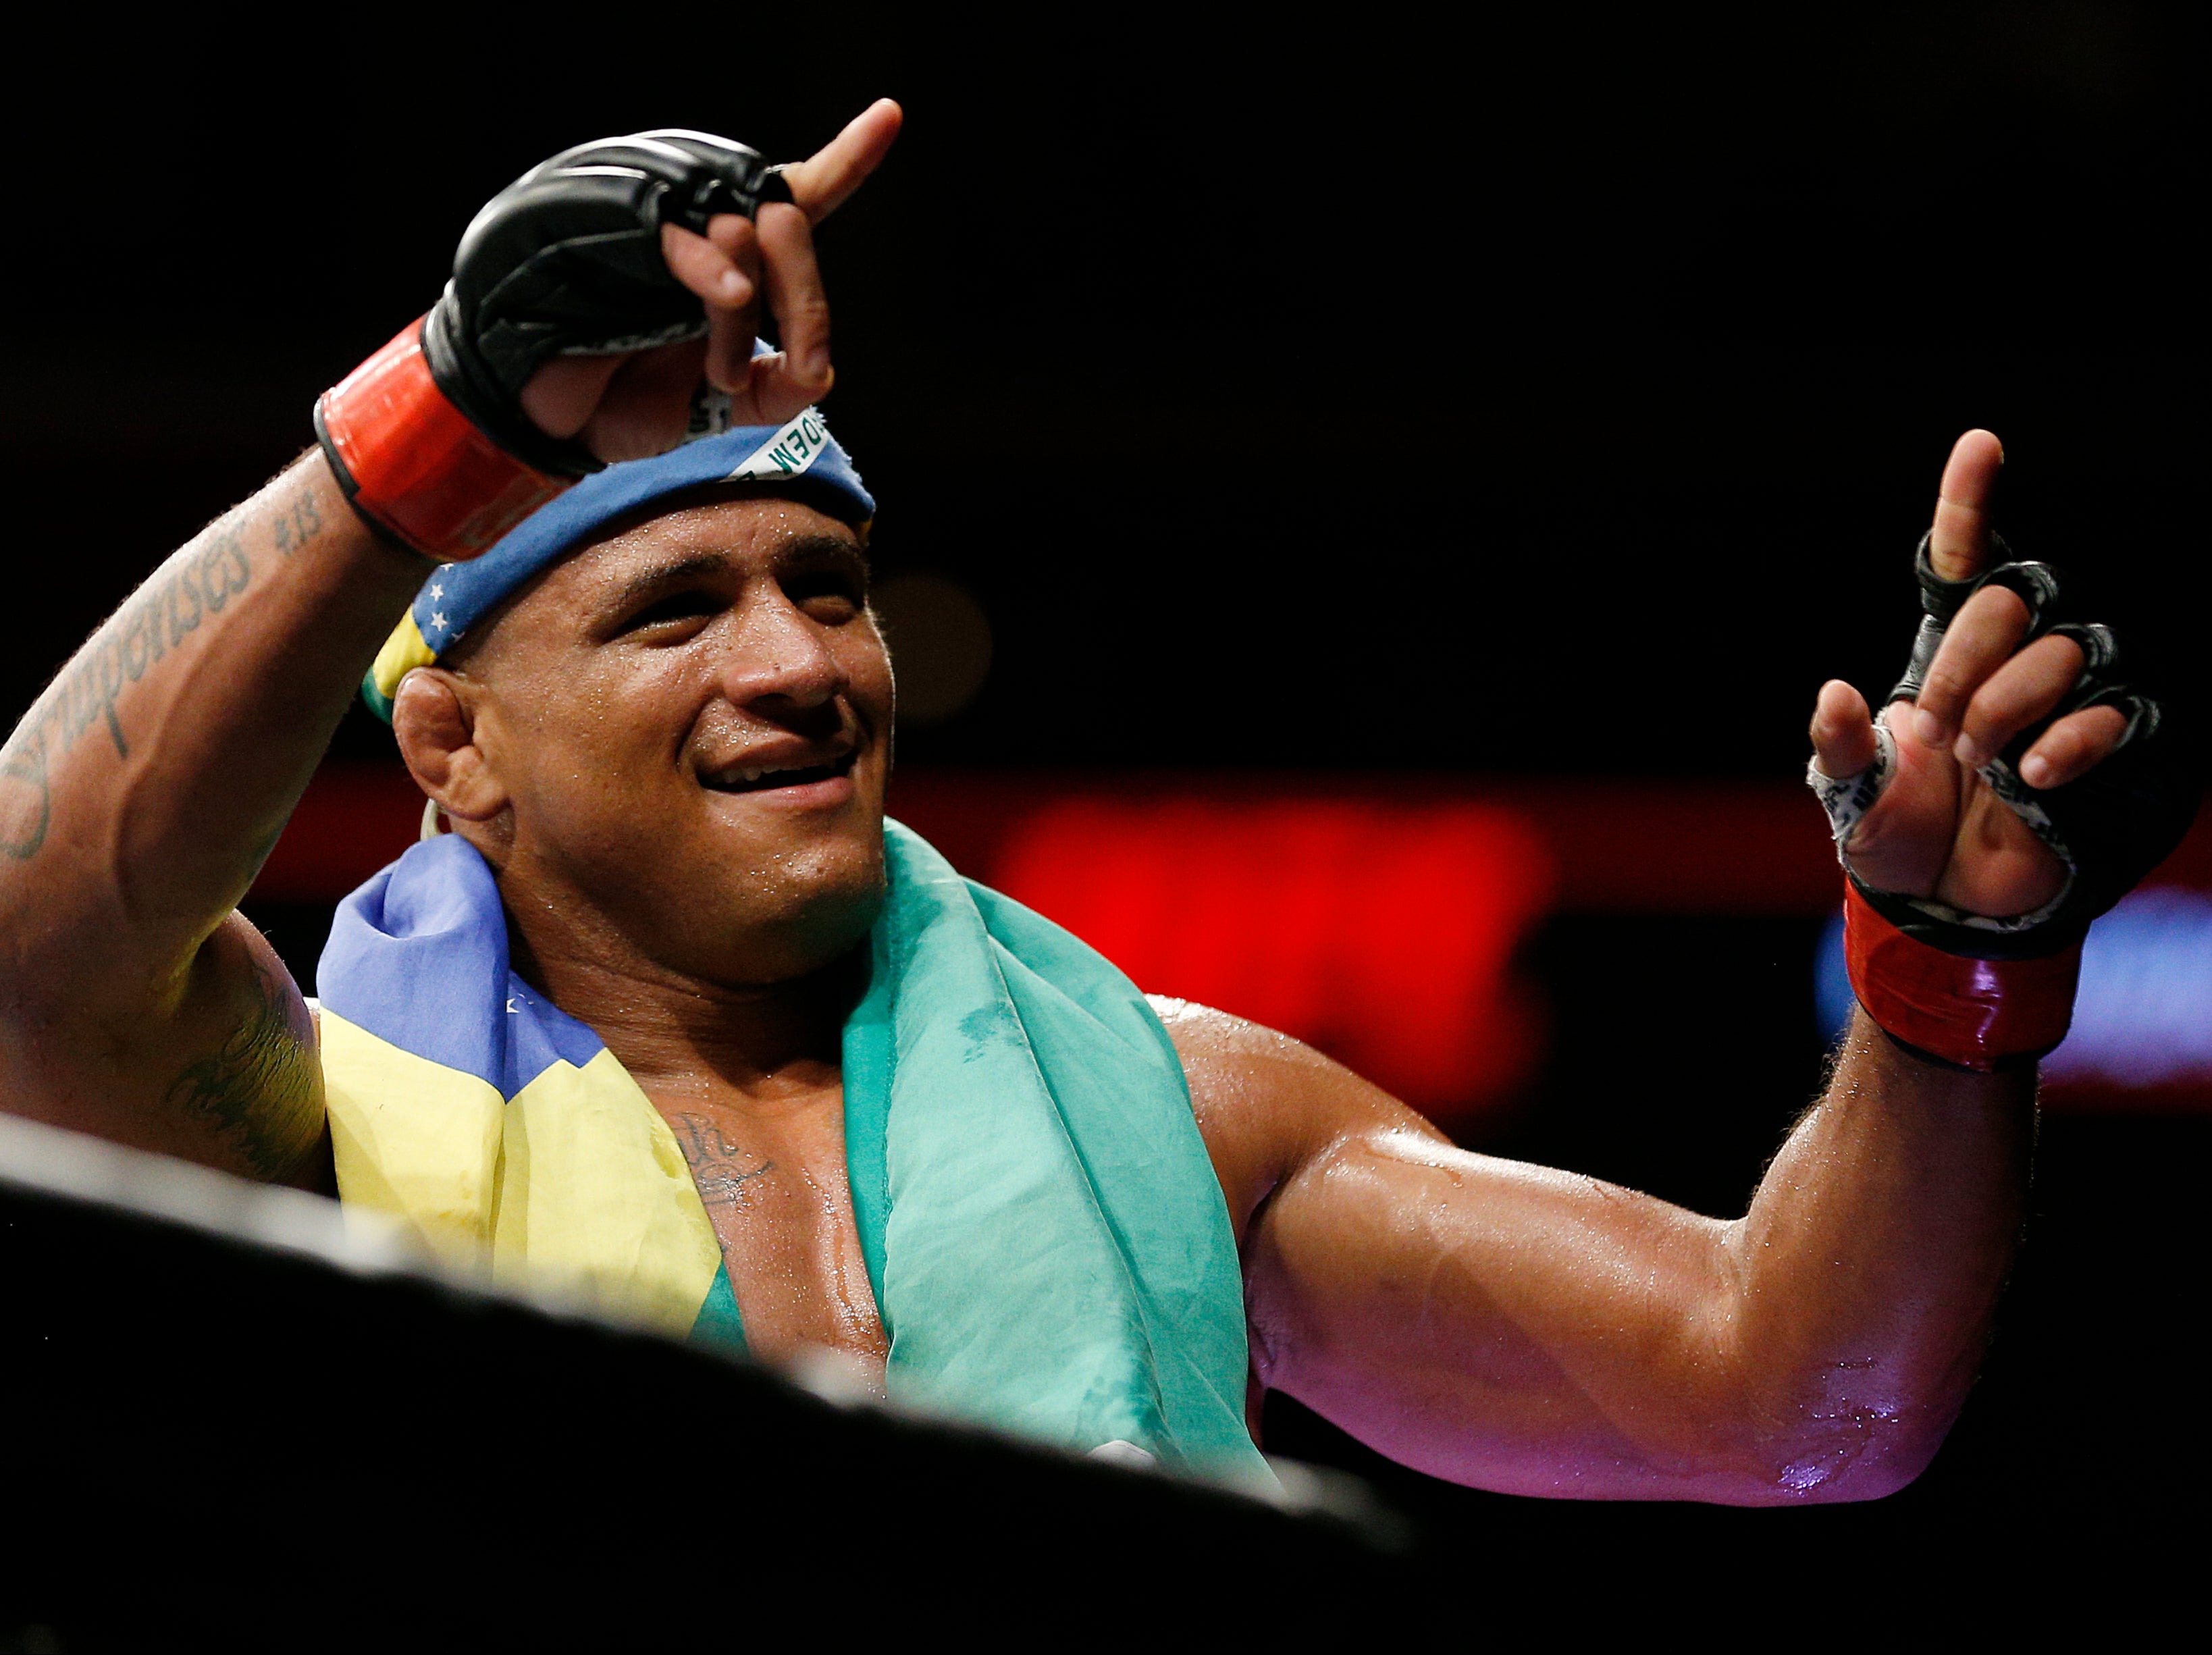 One win could propel Gilbert Burns back into the UFC welterweight title picture